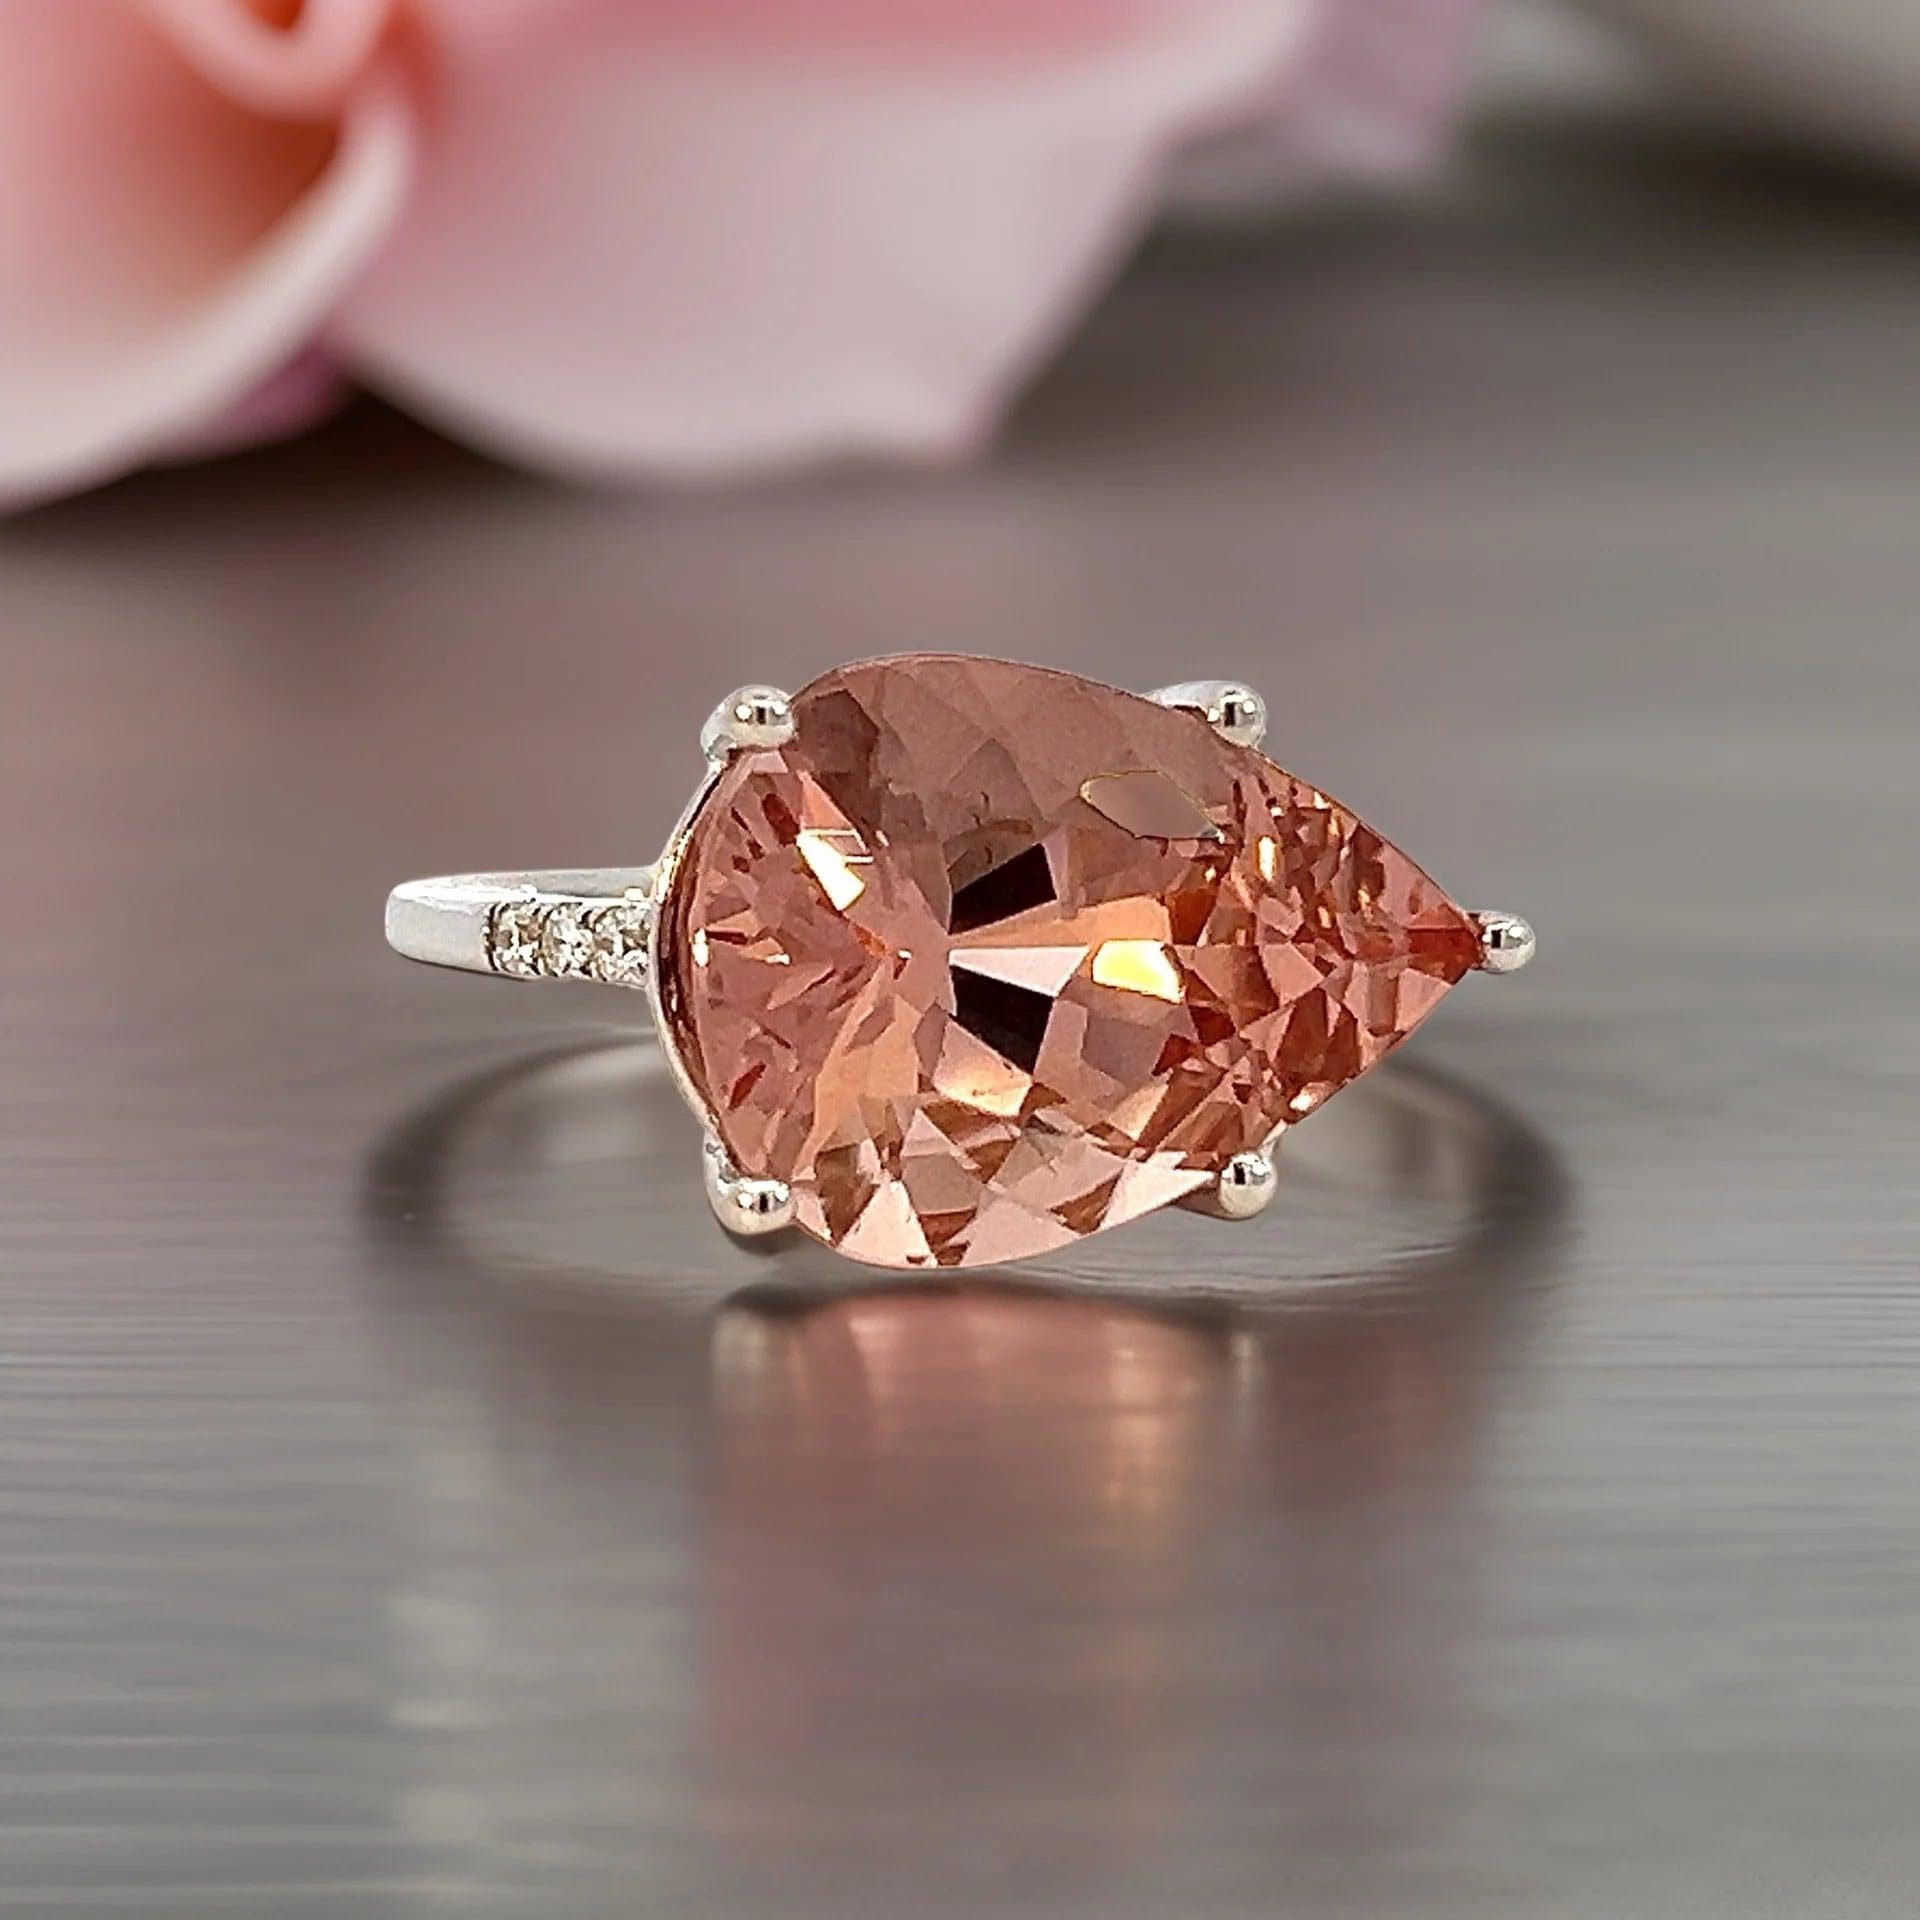 Natural Morganite Diamond Ring 6.5 14k White Gold 8.99 TCW Certified  For Sale 1